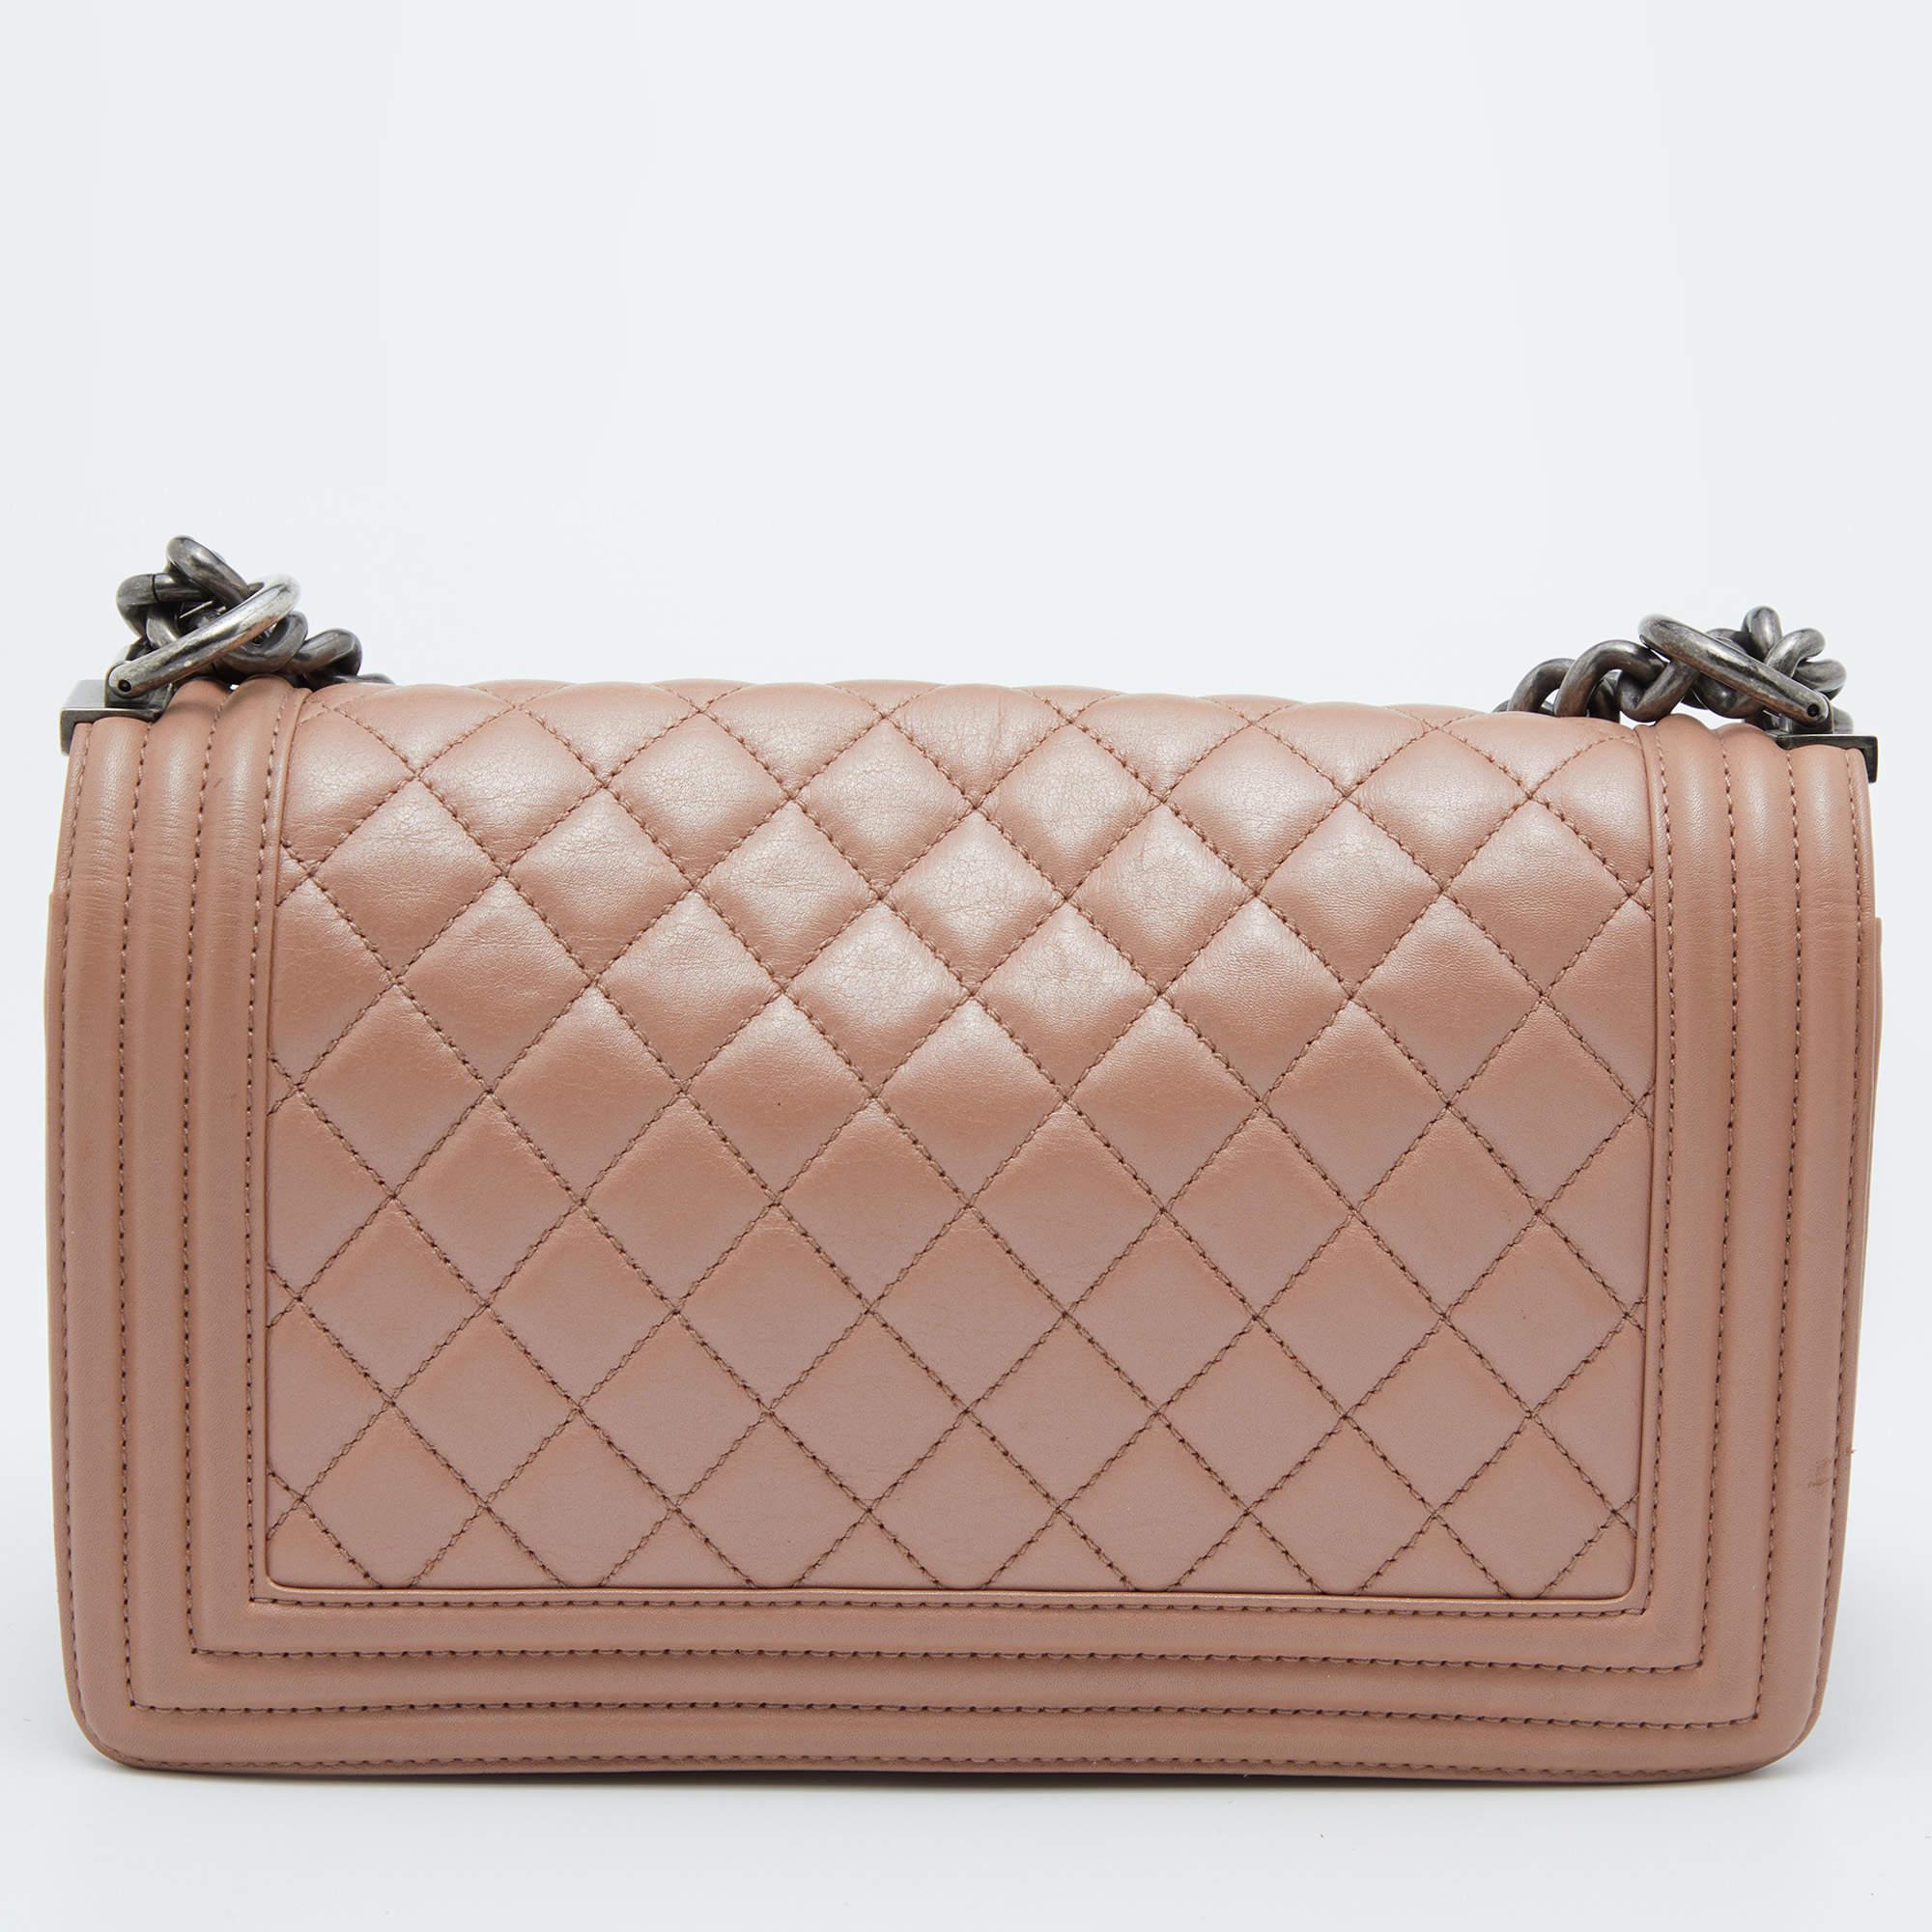 Chanel Beige Quilted Leather Medium Boy Flap Bag 3